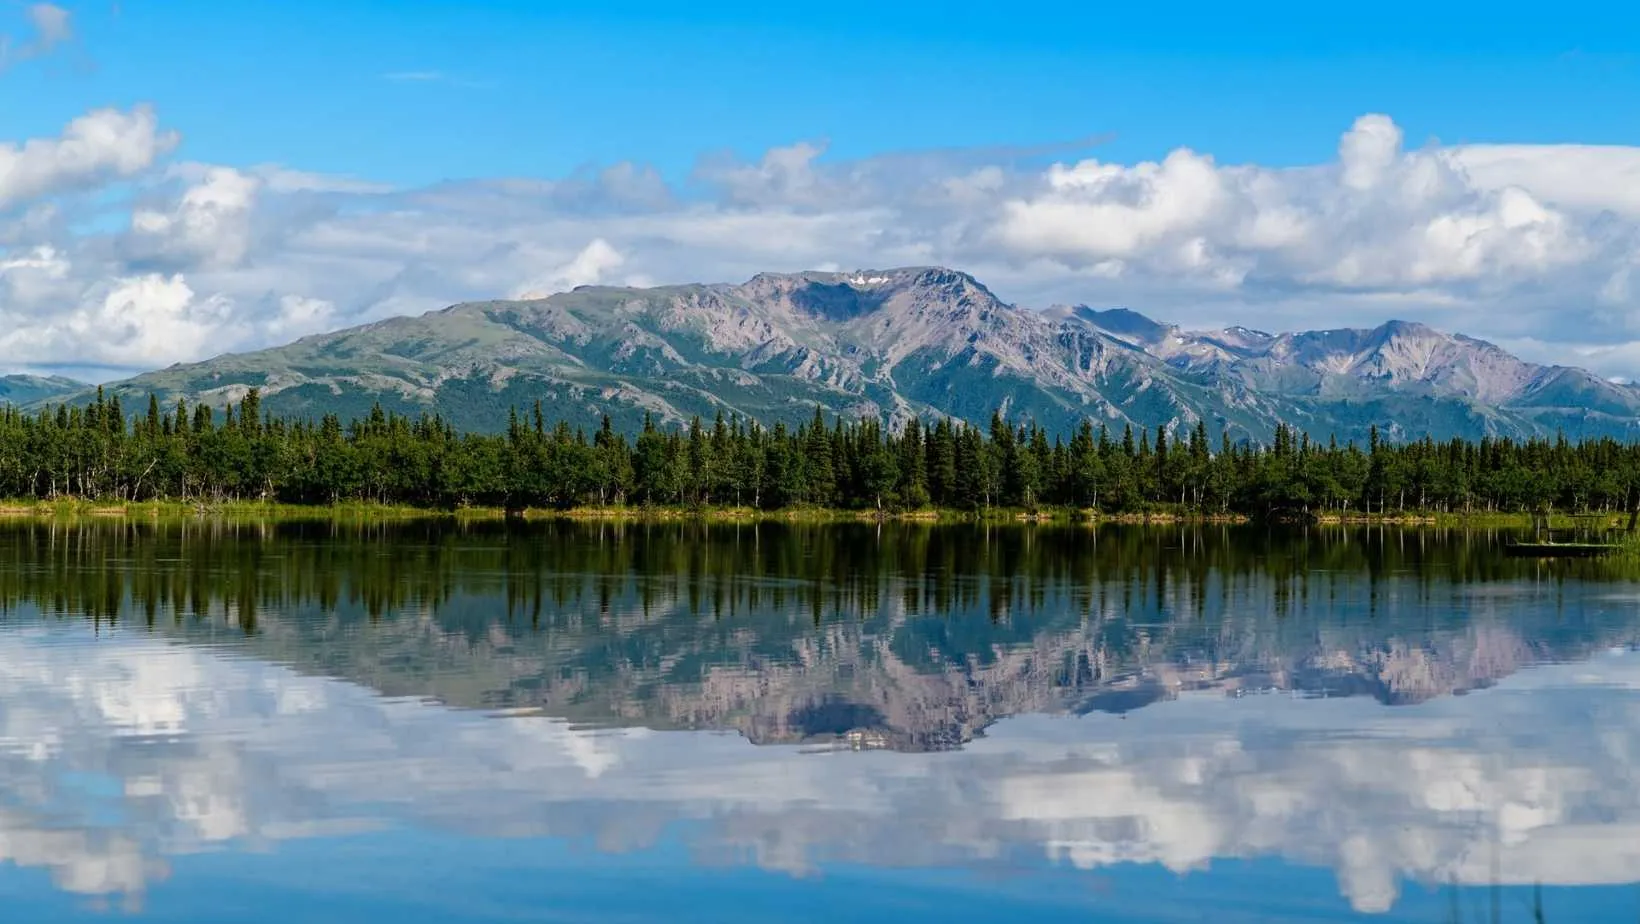 Denali National Park and Preserve, United States, Reflections are always special, especially when there are Alaskan mountains around.